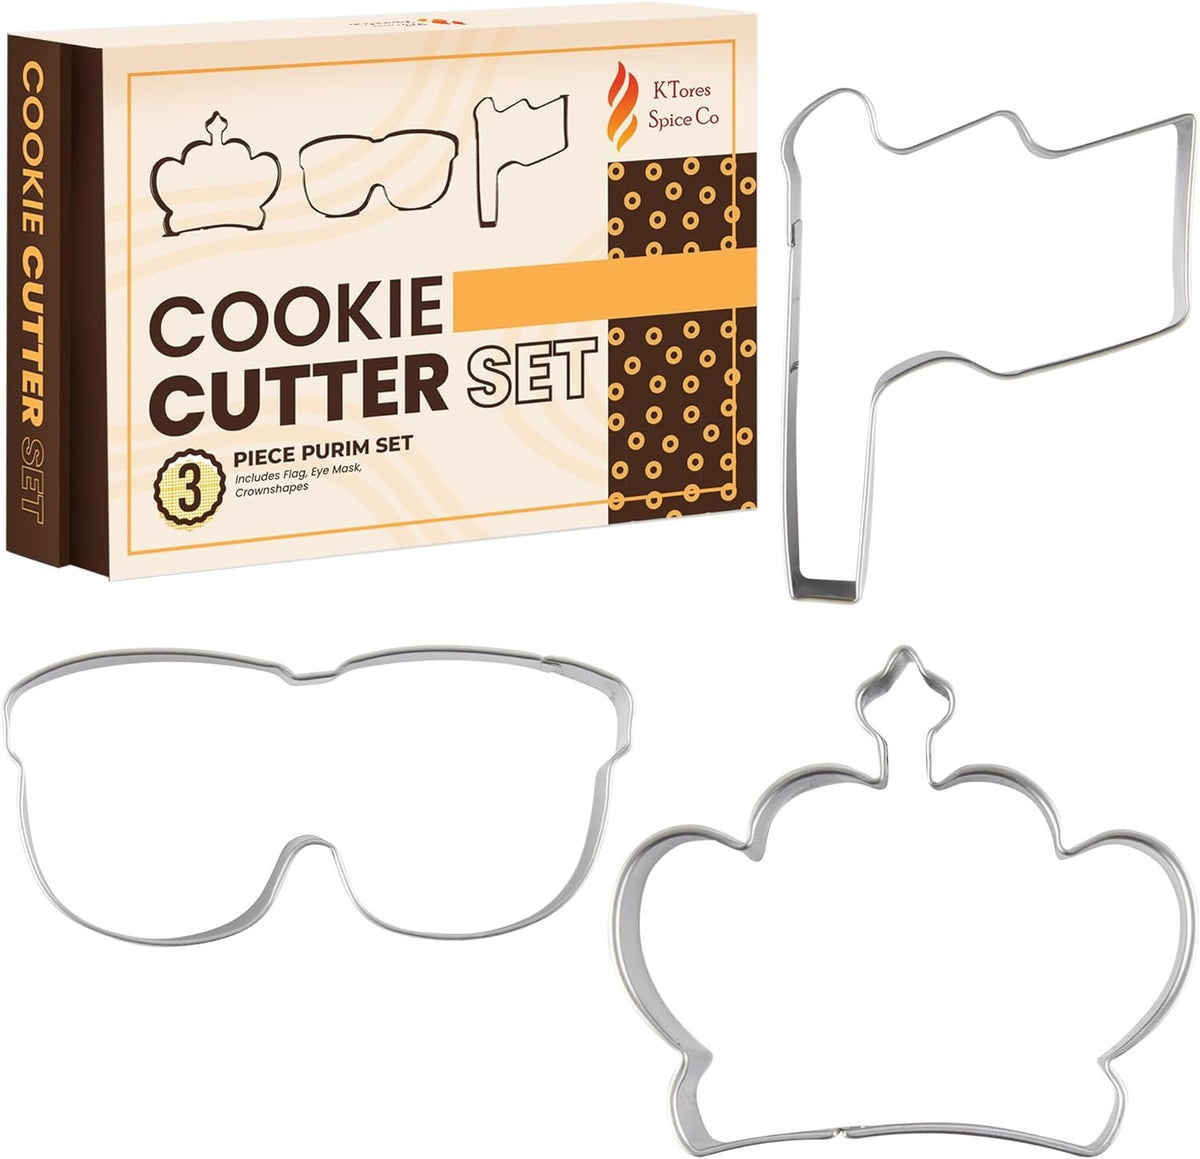 K'Tores Spice Co - Hebrew Jewish Cookie Cutters, Convenient Box - Food Safe Stainless Steel - Purim, Hanukkah and more